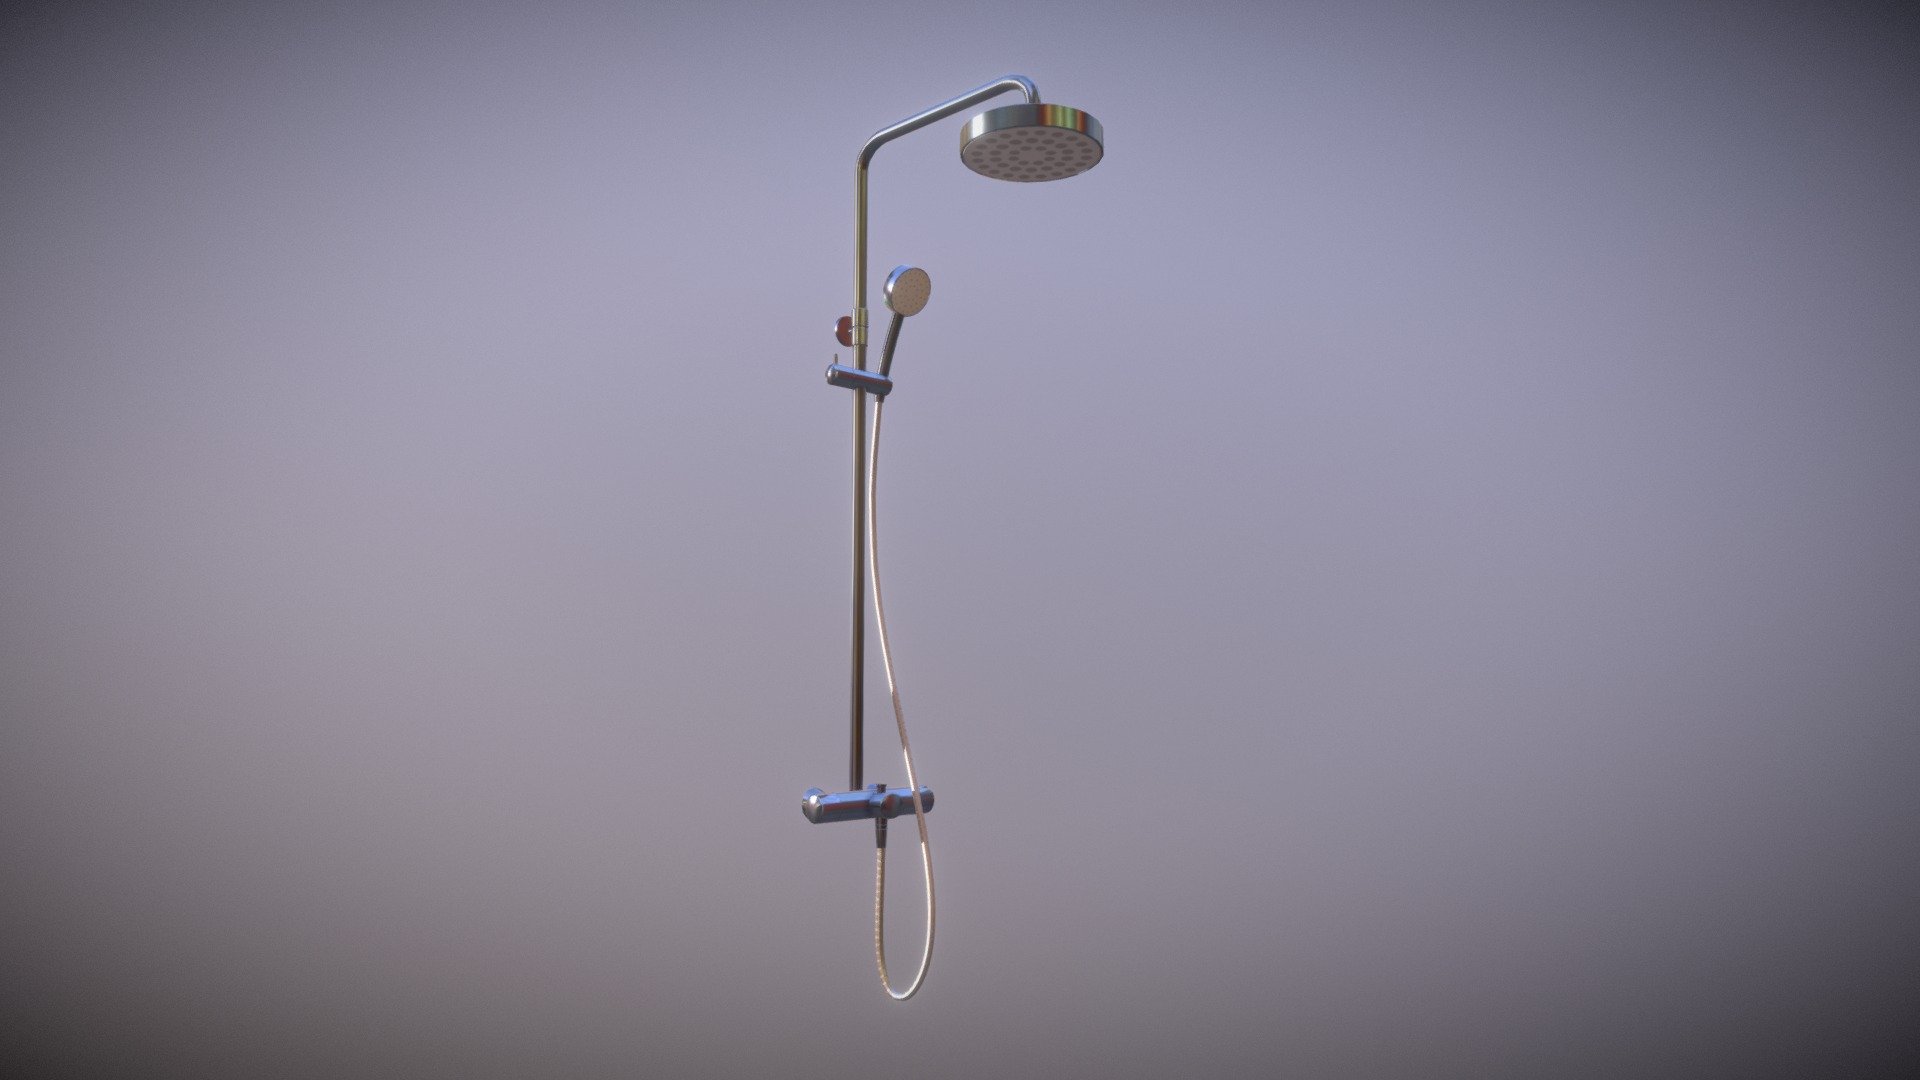 Shower with wall and hand parts - Low Poly Game Ready VR AR optimized

One non-overlapping UV atlas as PBR painted
Comes as one mesh and fixed parts

Additional ZIP file includes: mesh: FBX / OBJ / DAE 

textures: PNG 2K / albedo diffuse / normal / ambient occlusion / metallic - Wall and Hand Shower Low Poly Game Ready - Buy Royalty Free 3D model by FunFant 3d model